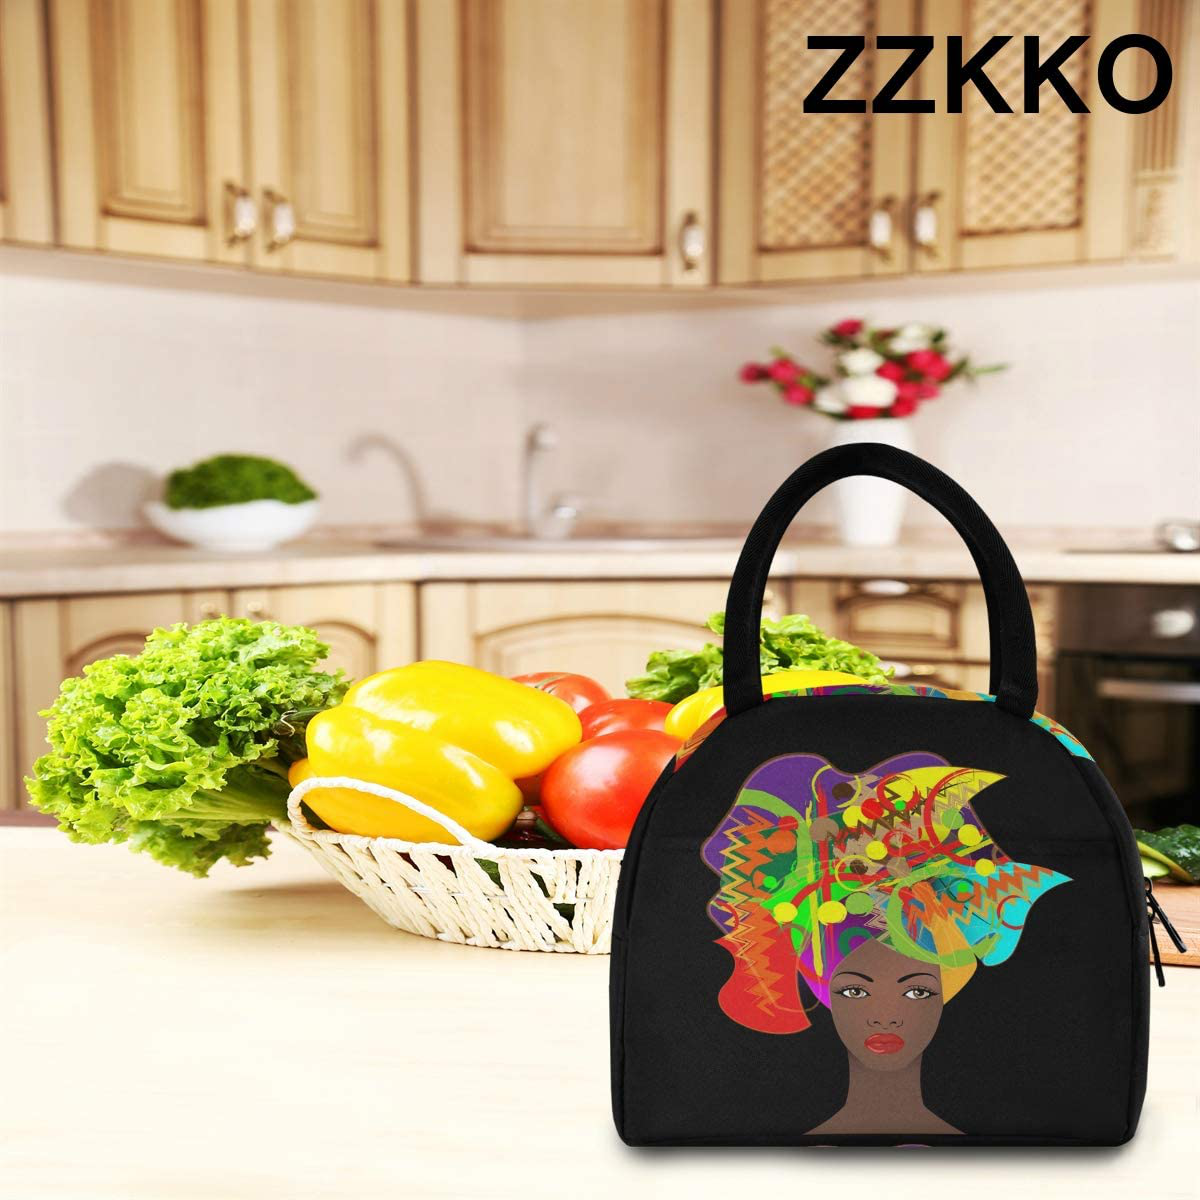 ZZKKO American USA Flag Retro Lunch Bag Box Tote Organizer Lunch Container Insulated Zipper Meal Prep Cooler Handbag For Women Men Home School Office Outdoor Use